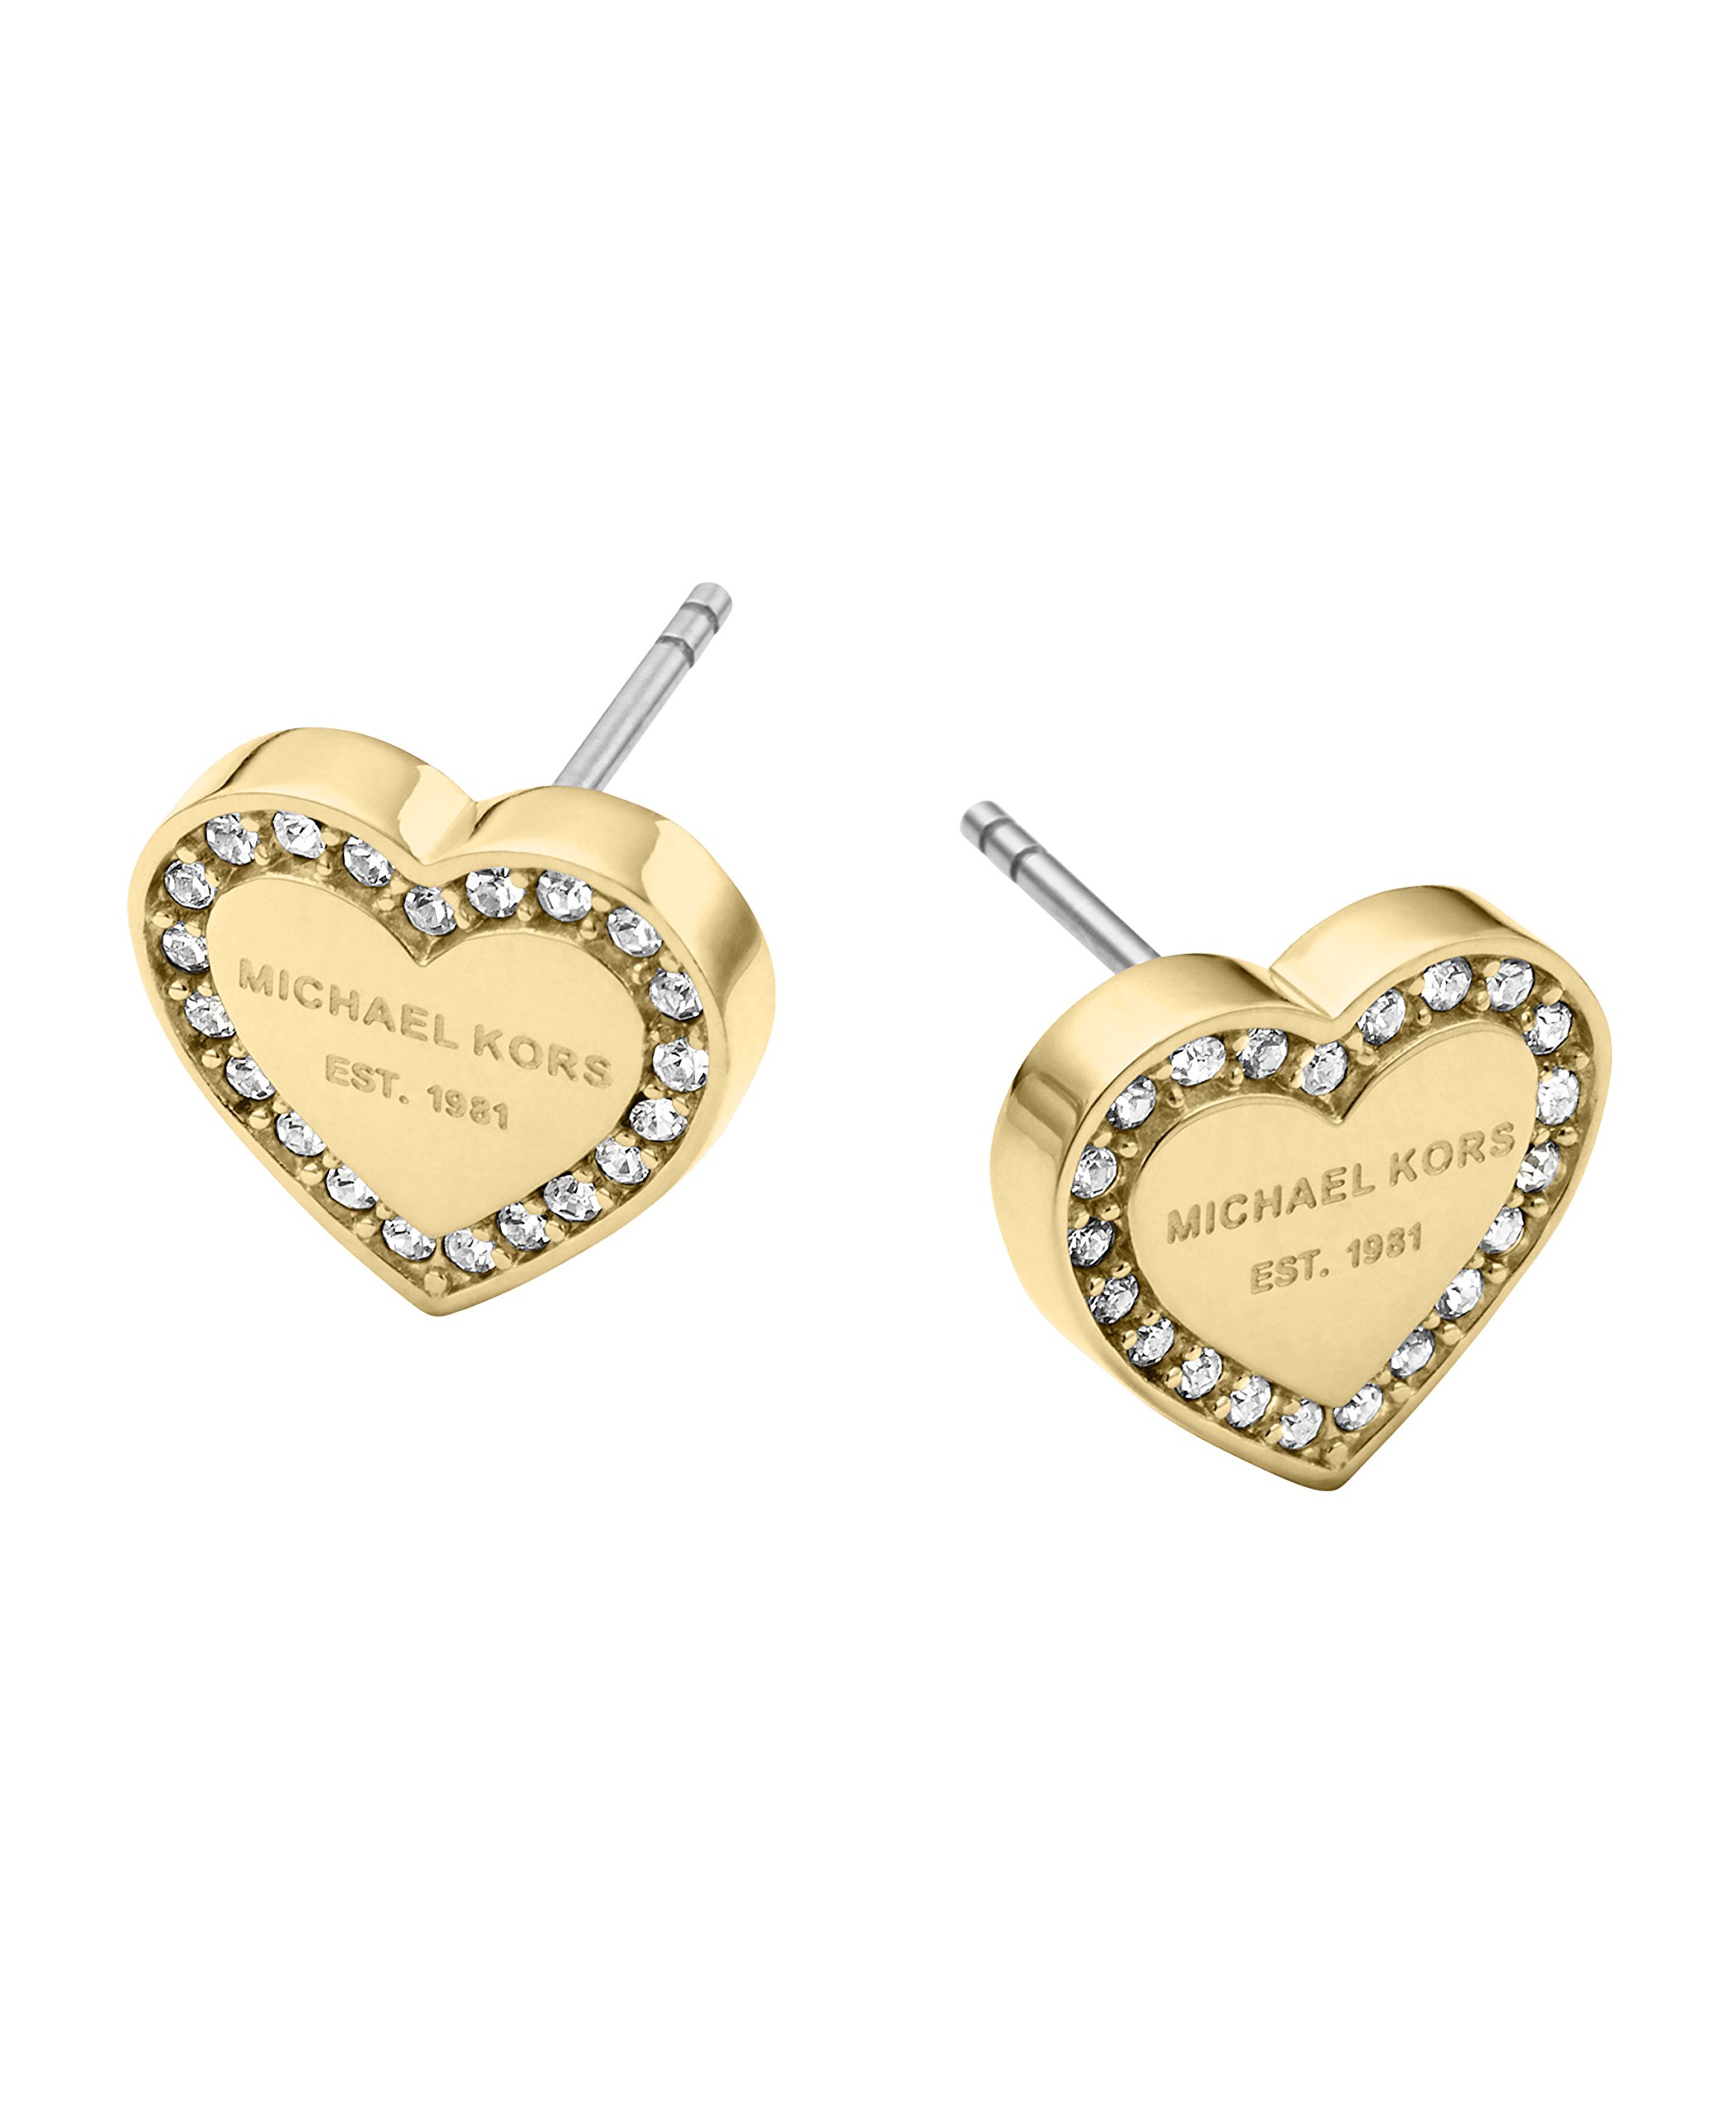 Michael Kors Women's Stainless Steel Heart Shaped Stud Earrings With Crystal Accents